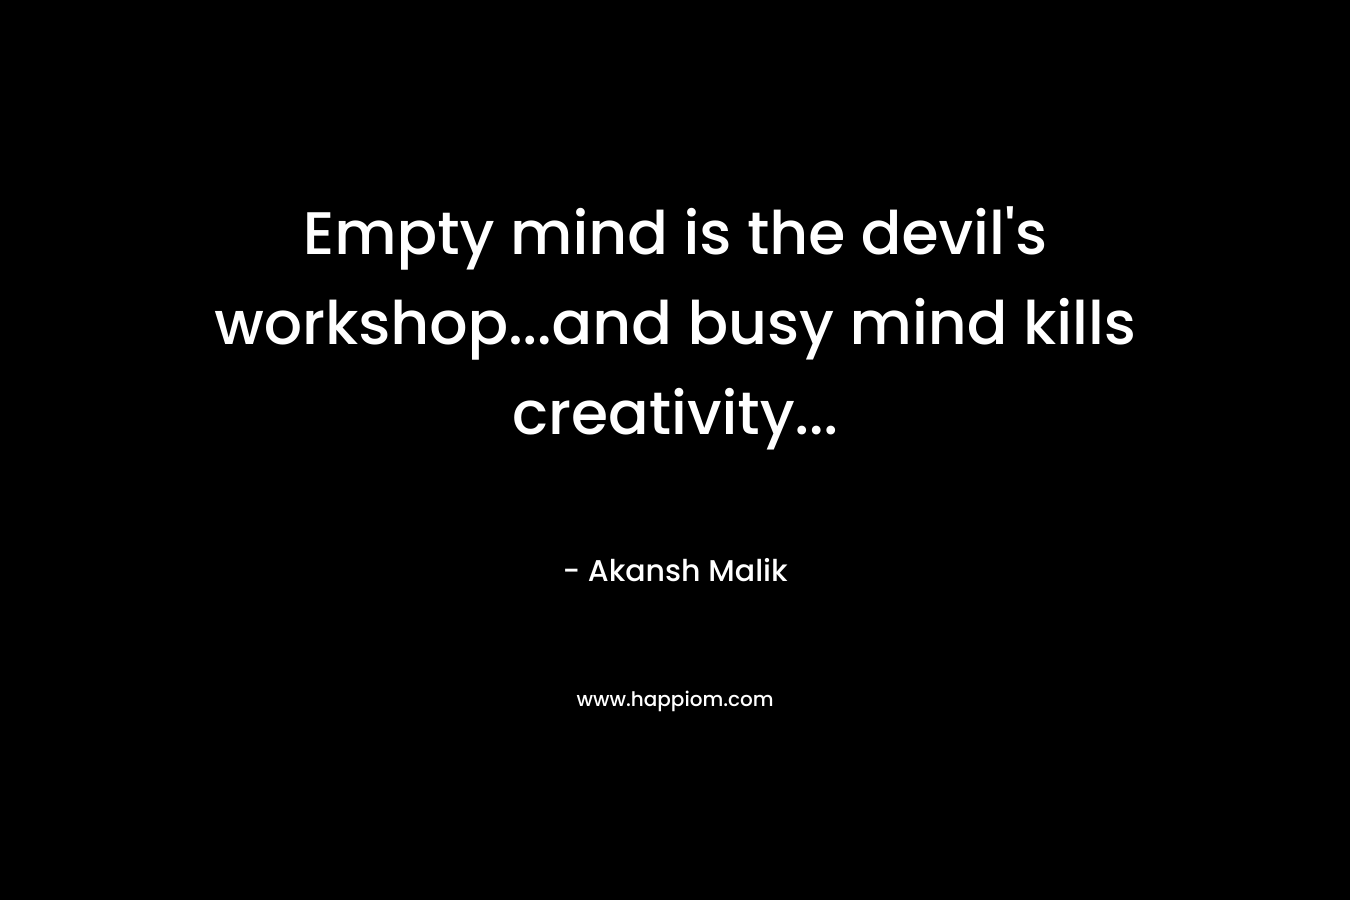 Empty mind is the devil's workshop...and busy mind kills creativity...